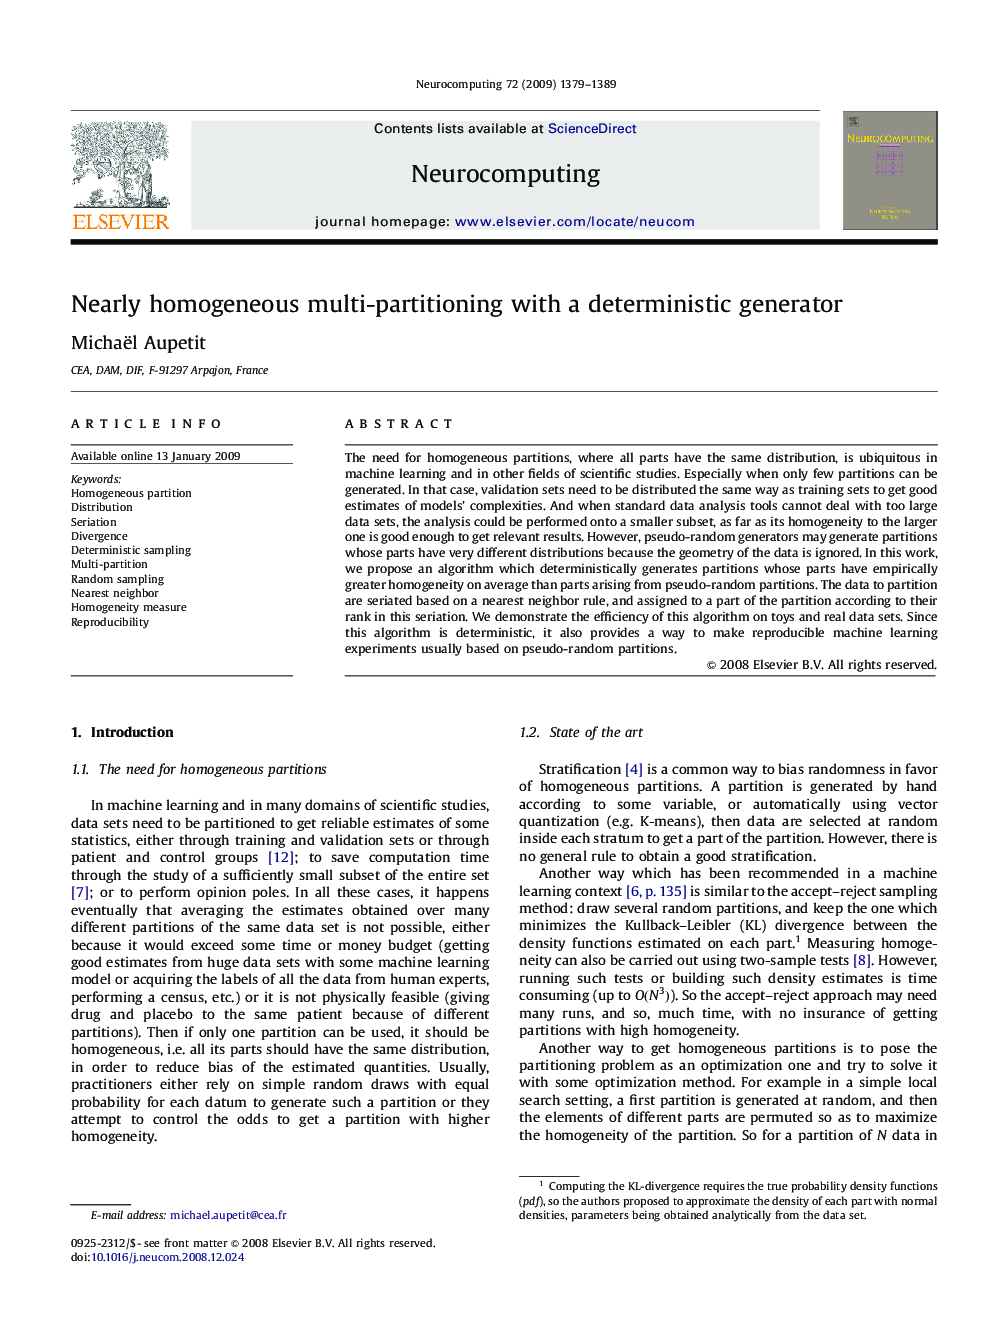 Nearly homogeneous multi-partitioning with a deterministic generator